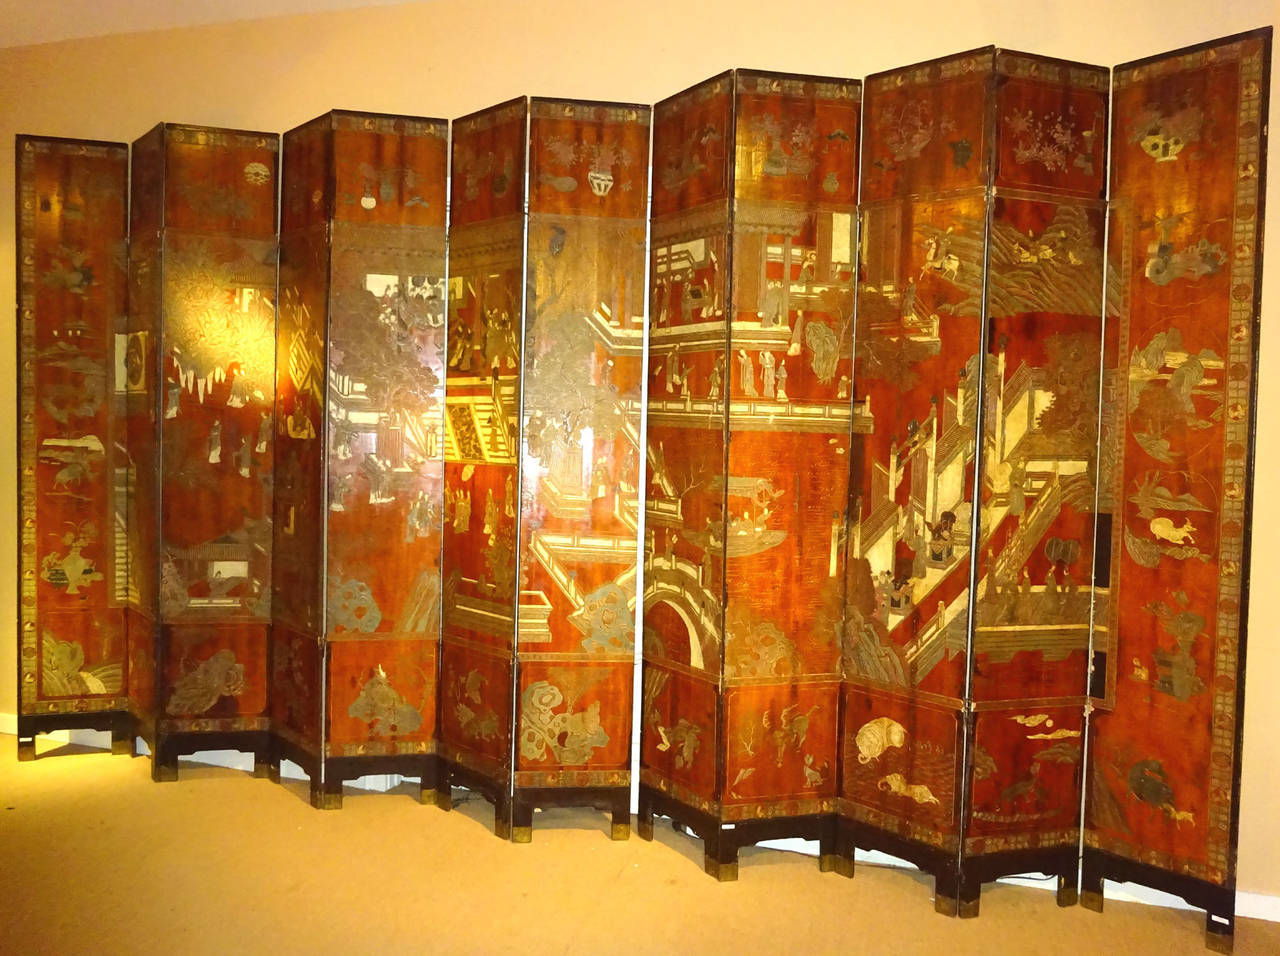 Early 18th century 12-panel Chinese Coromandel Large Screen from the K'ang Hsi Dynasty - Each Panel approximately 17½